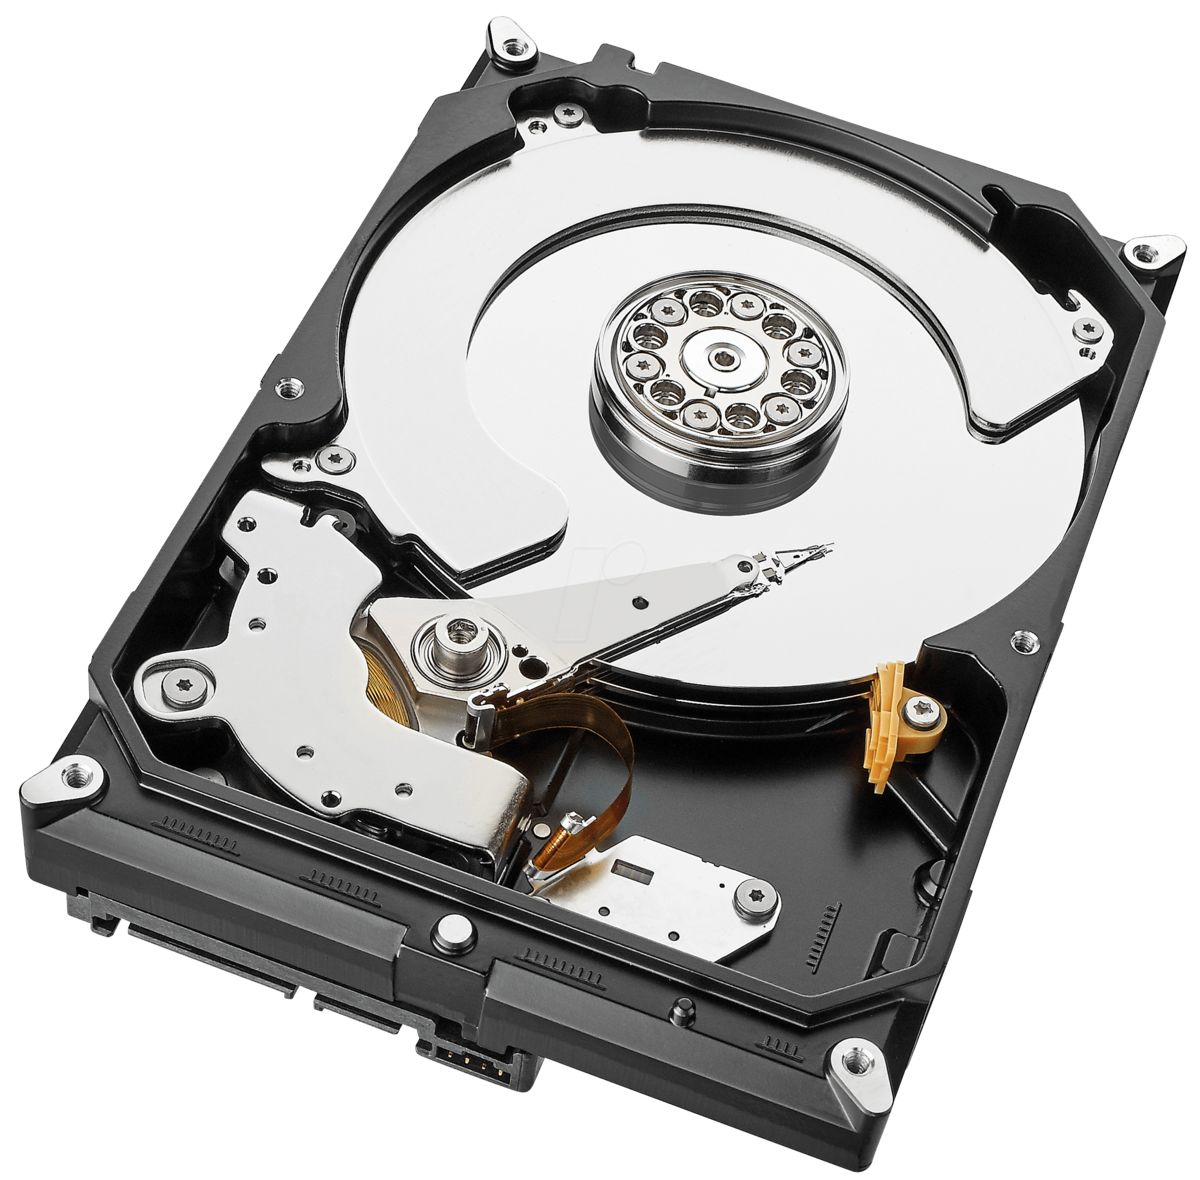 SEAGATE NAS HDD 4TB IronWolf 5400rpm 6Gb/s SATA 256MB cache 3.5inch 24x7 CMR for NAS and RAID rackmount systems BLK_3